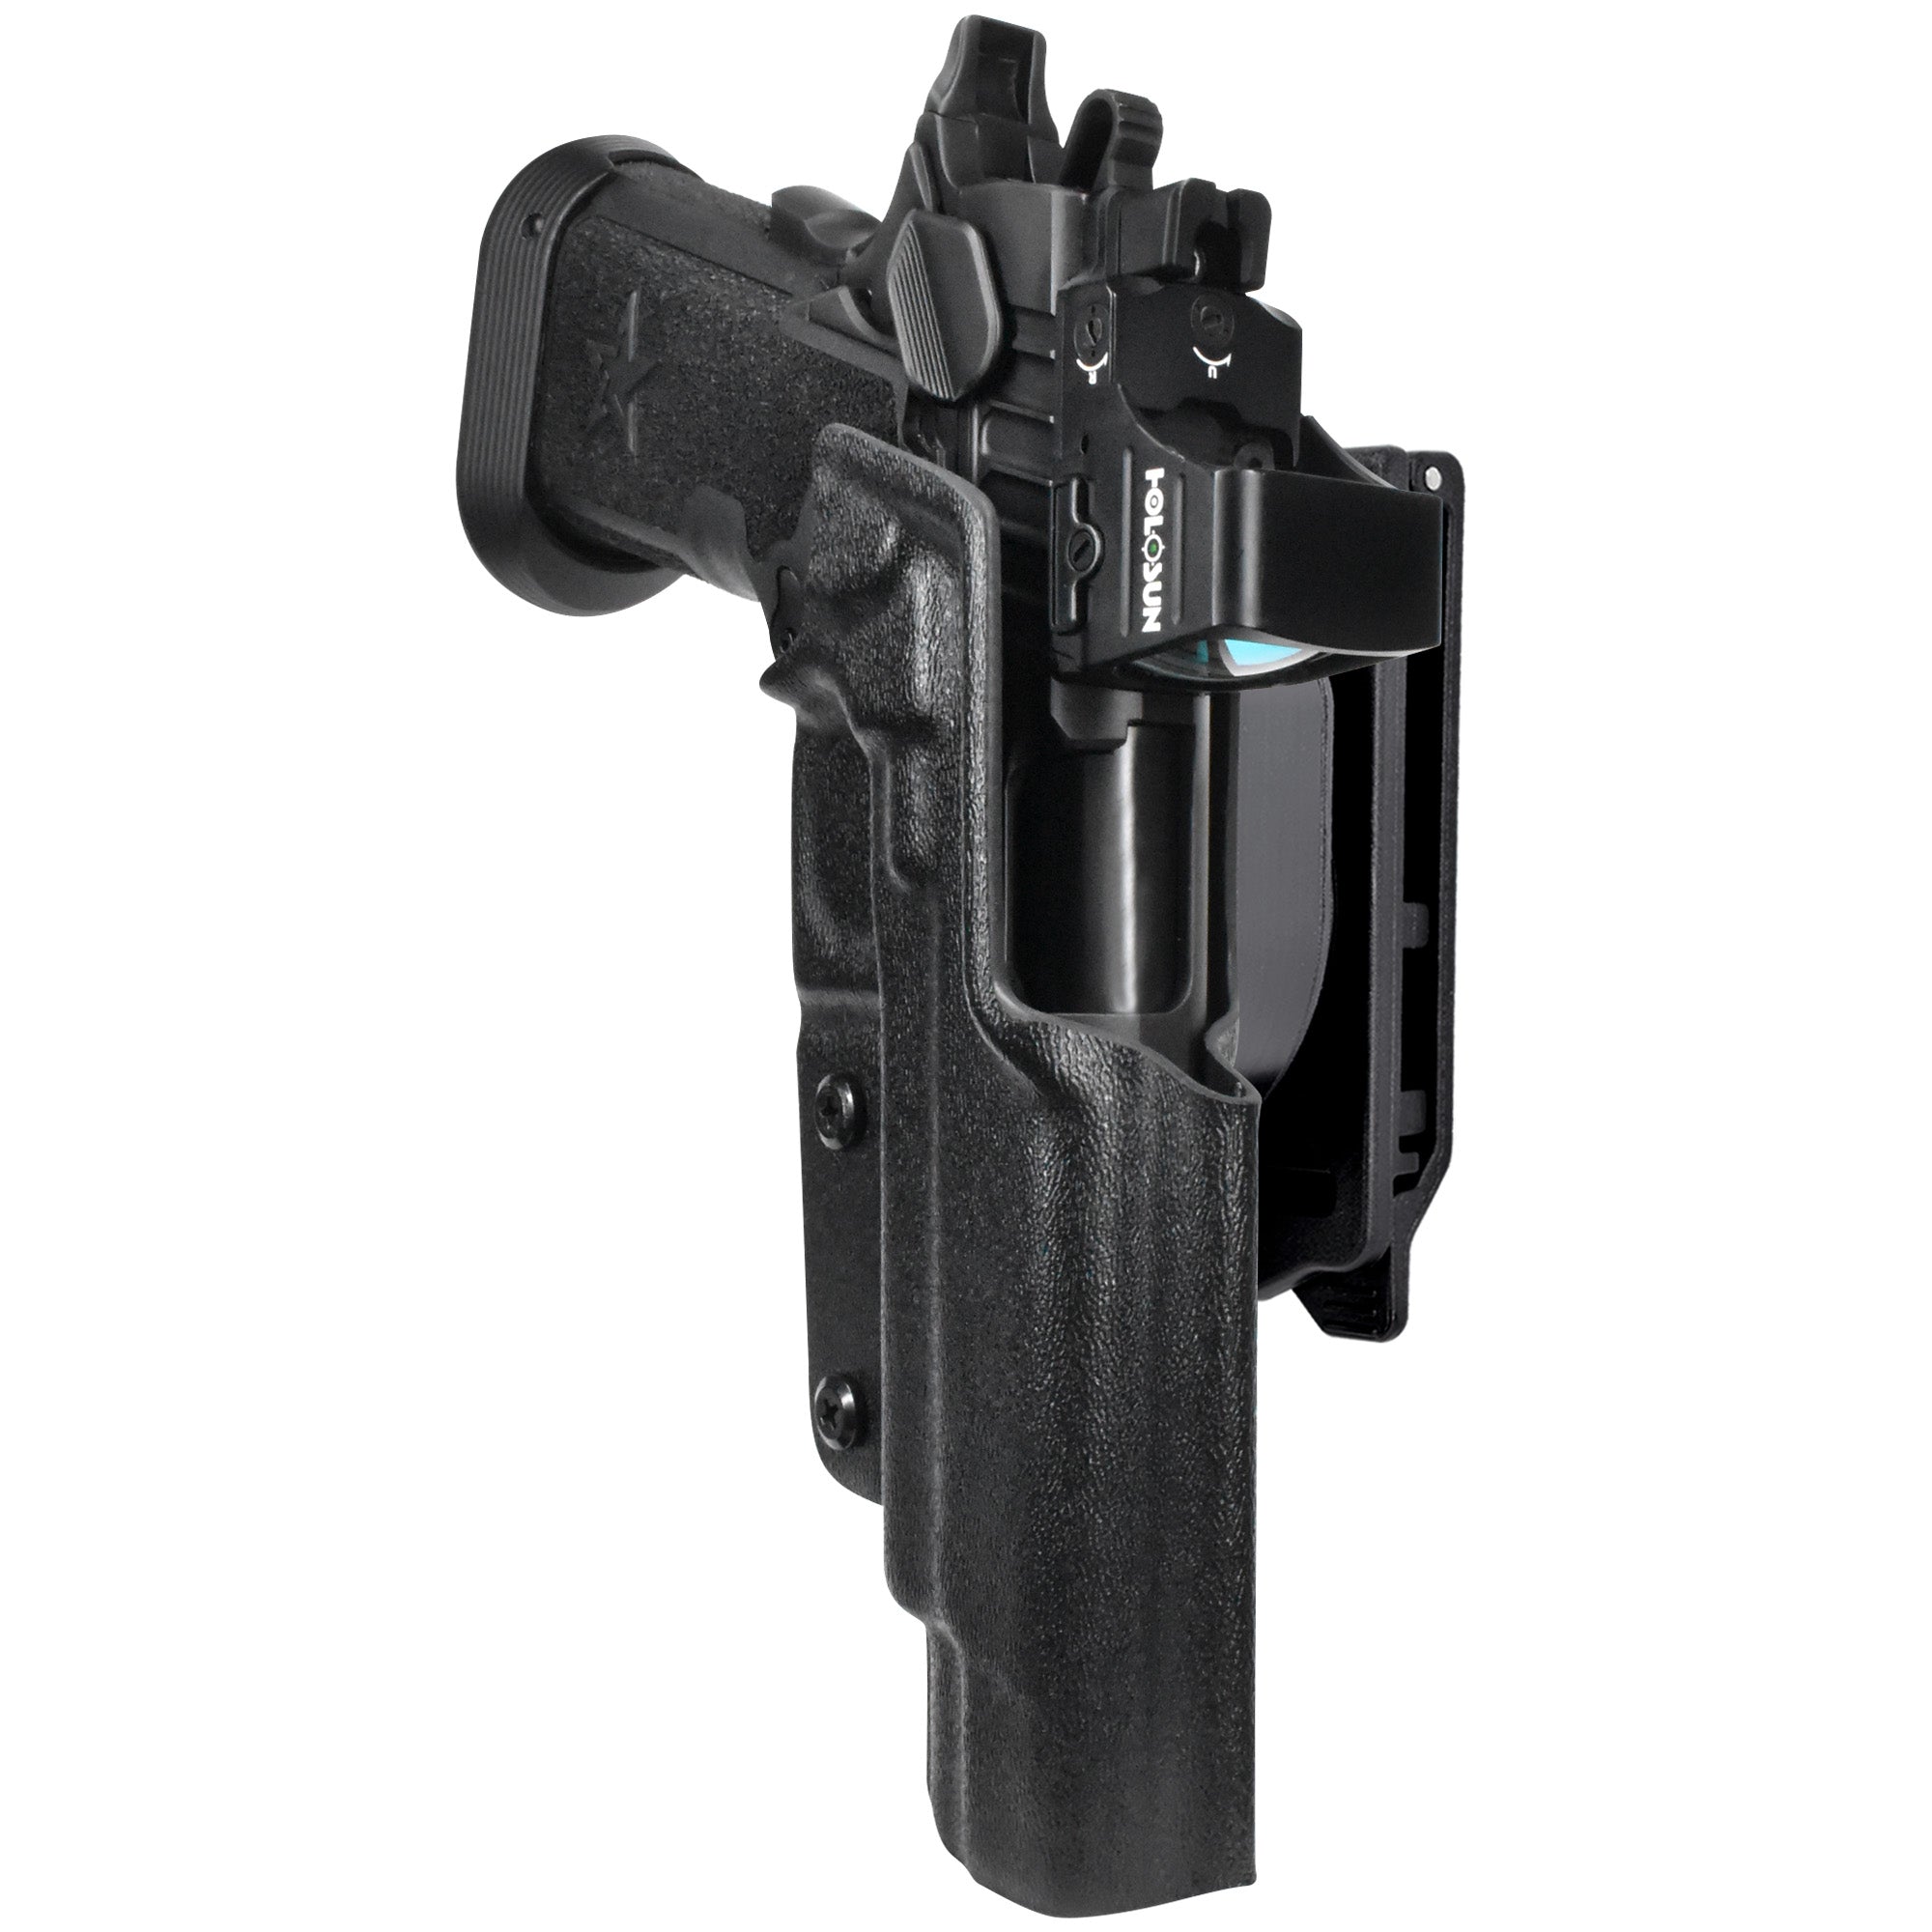 Staccato XL Quick Release IDPA Holster in Black